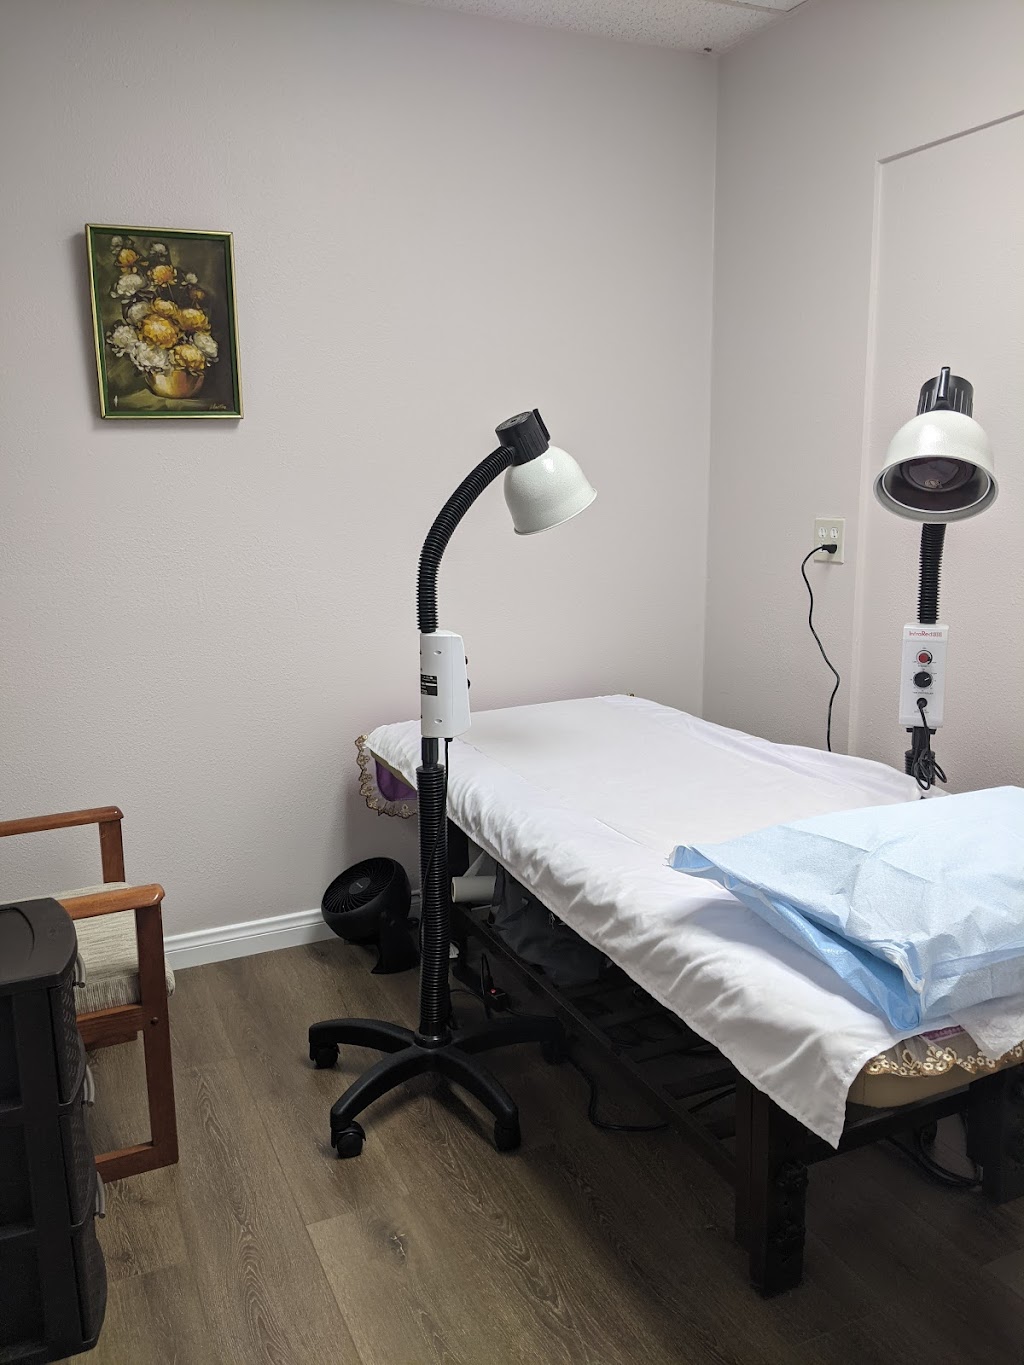 Come Hope Natural Care Center Acupuncture and Herbs | 1436 S Baldwin Ave, Arcadia, CA 91007 | Phone: (626) 349-5517